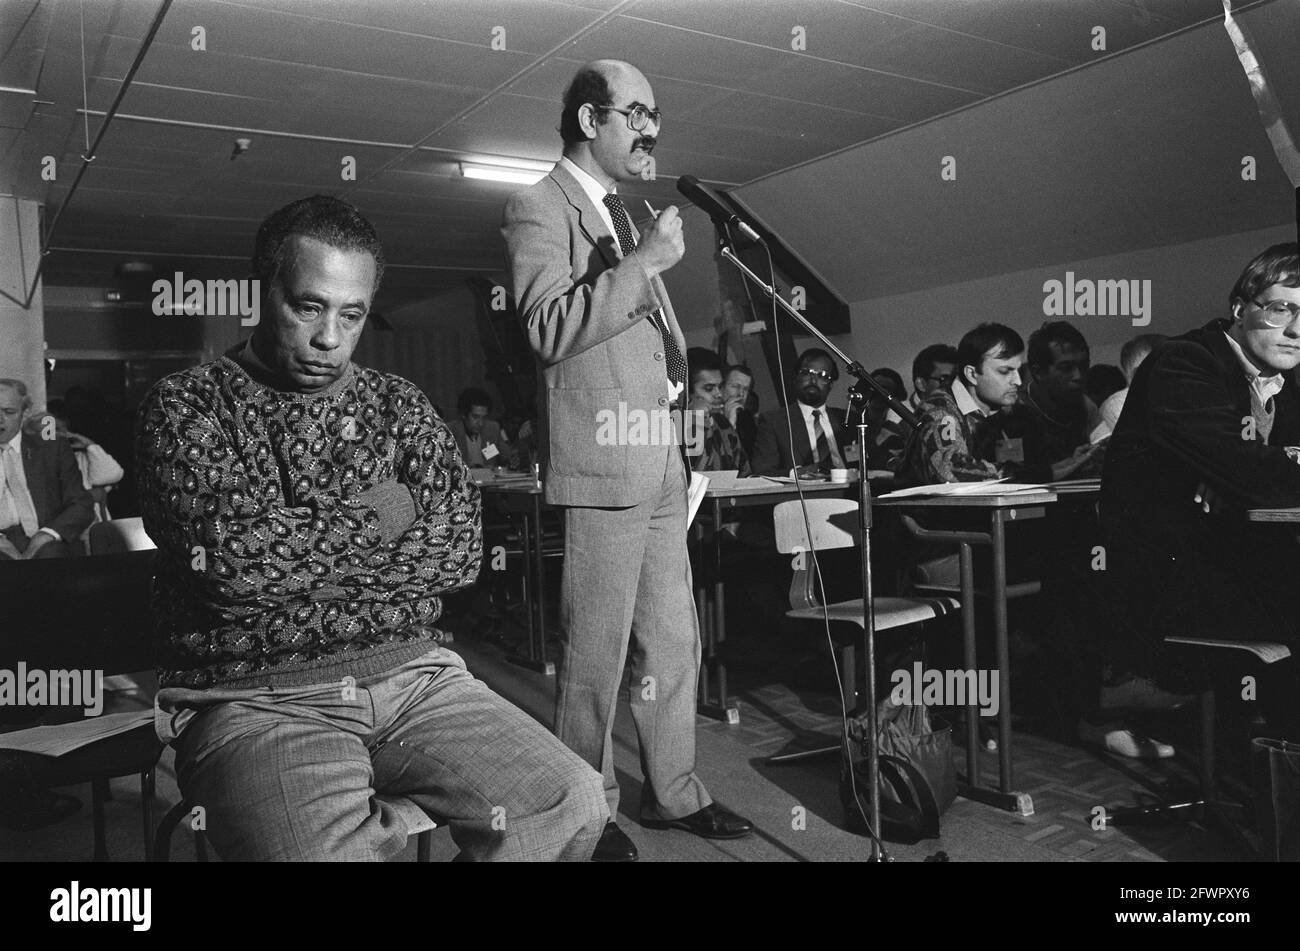 Mr. Janki (standing), Dr. Sedny (l), March 15, 1986, conferences, The Netherlands, 20th century press agency photo, news to remember, documentary, historic photography 1945-1990, visual stories, human history of the Twentieth Century, capturing moments in time Stock Photo